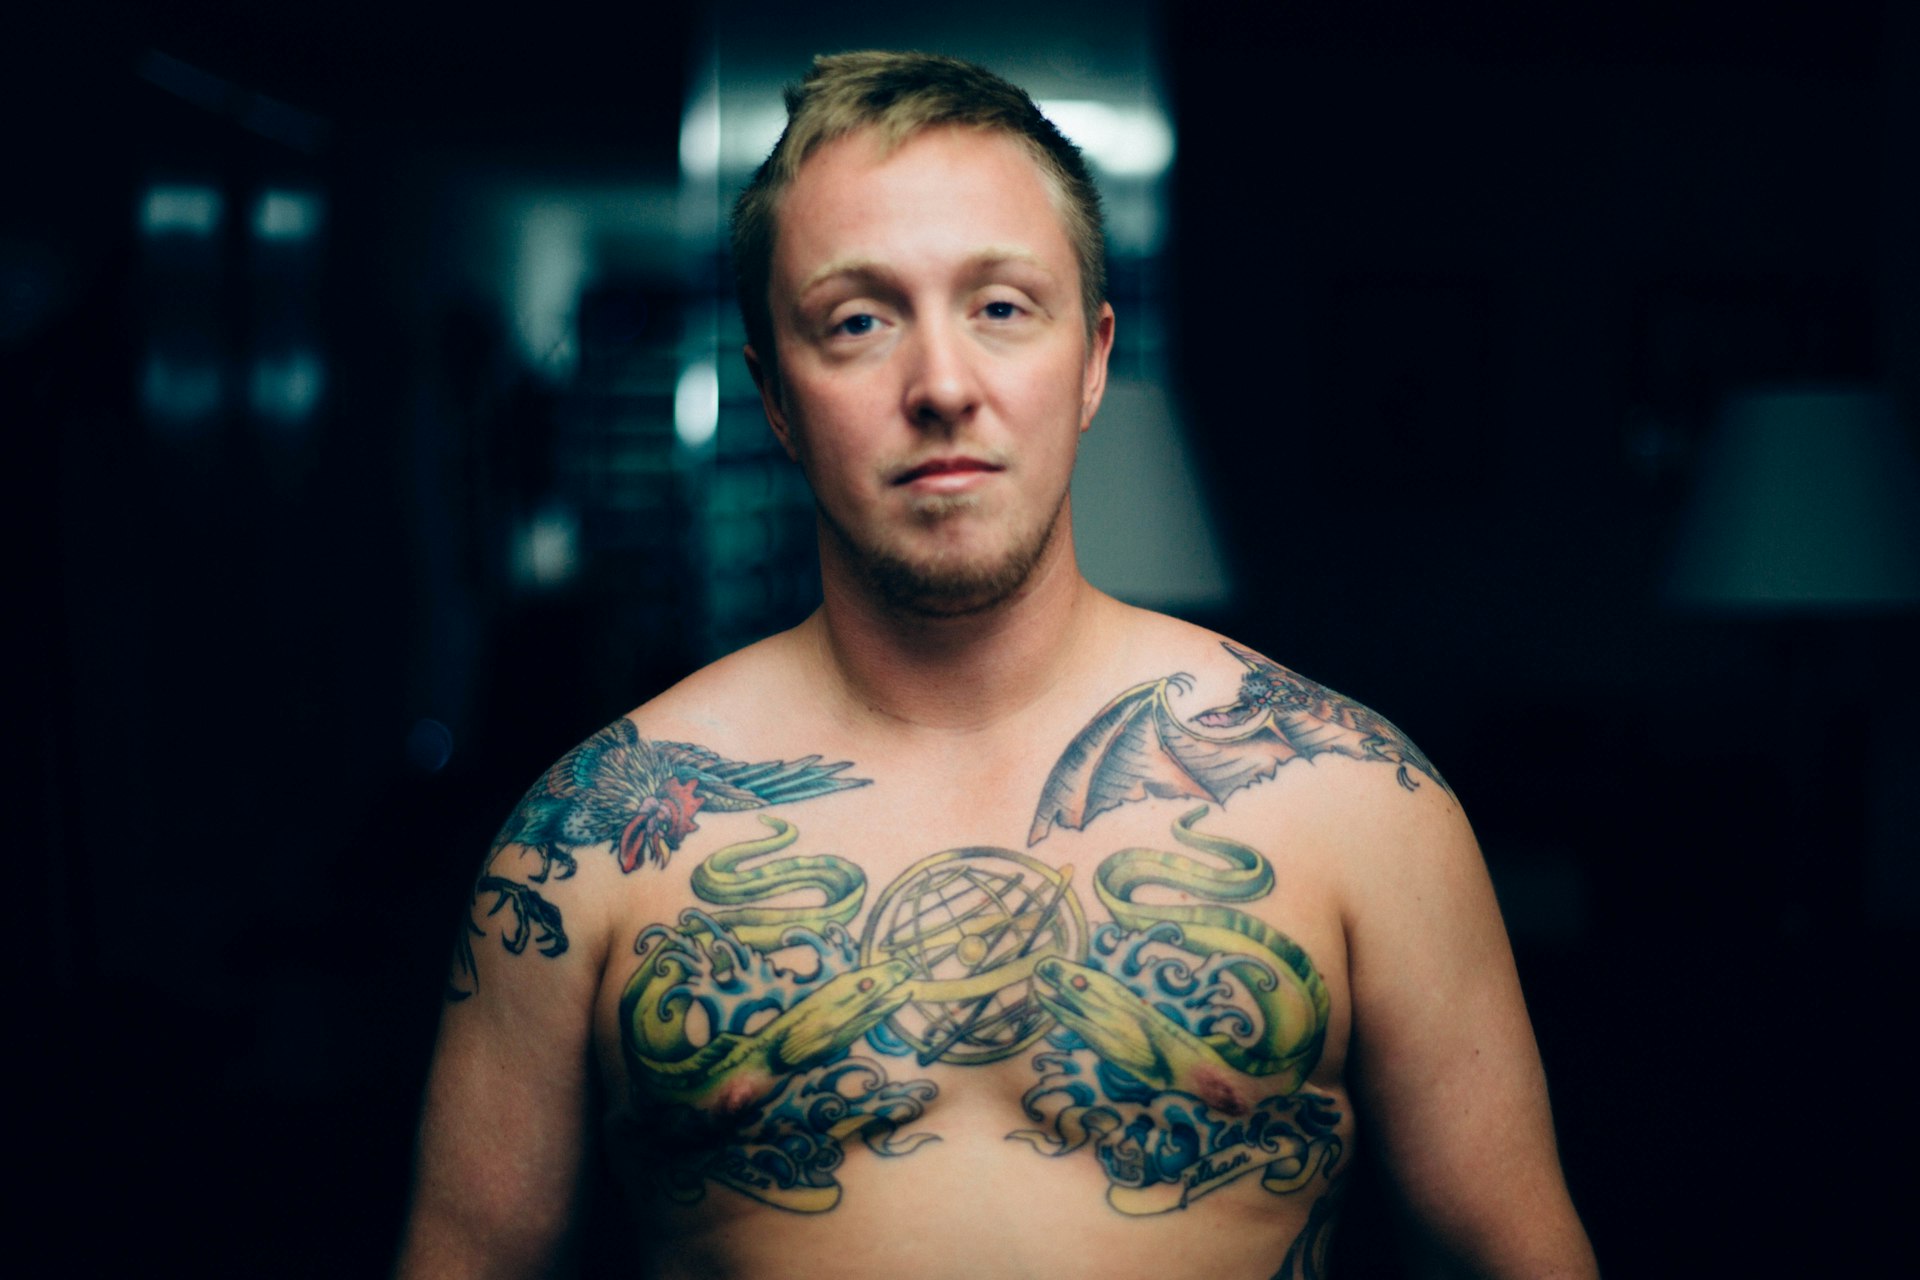 The Virginia tattoo artist transforming lives by inking over scars